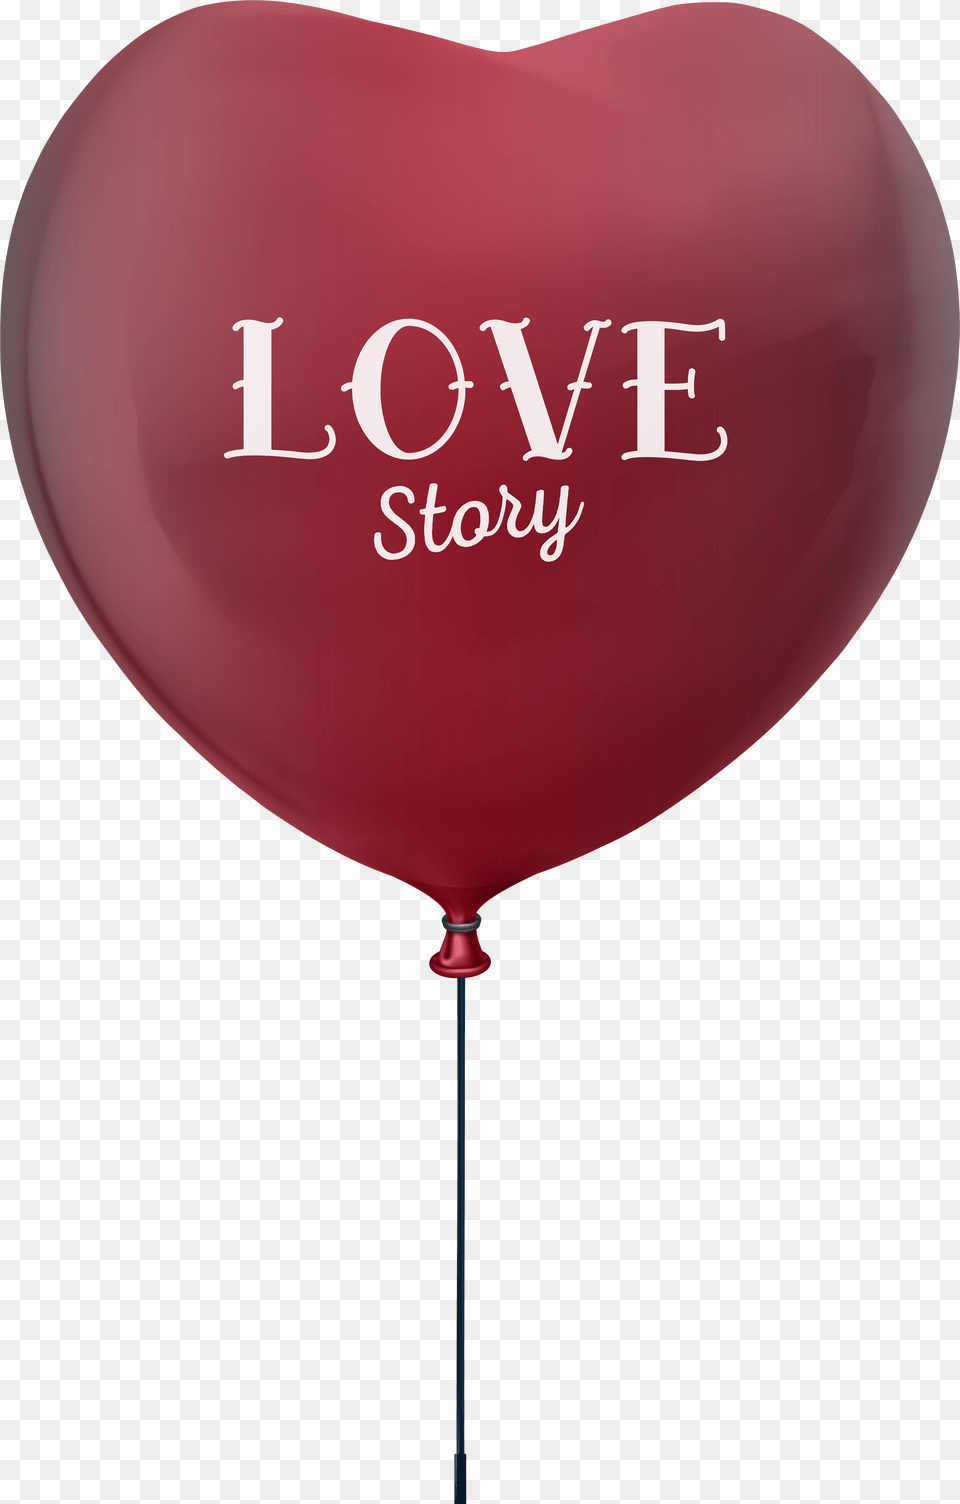 Balloon Download Clip Art Love Story Heart Balloon Love Story Png Image